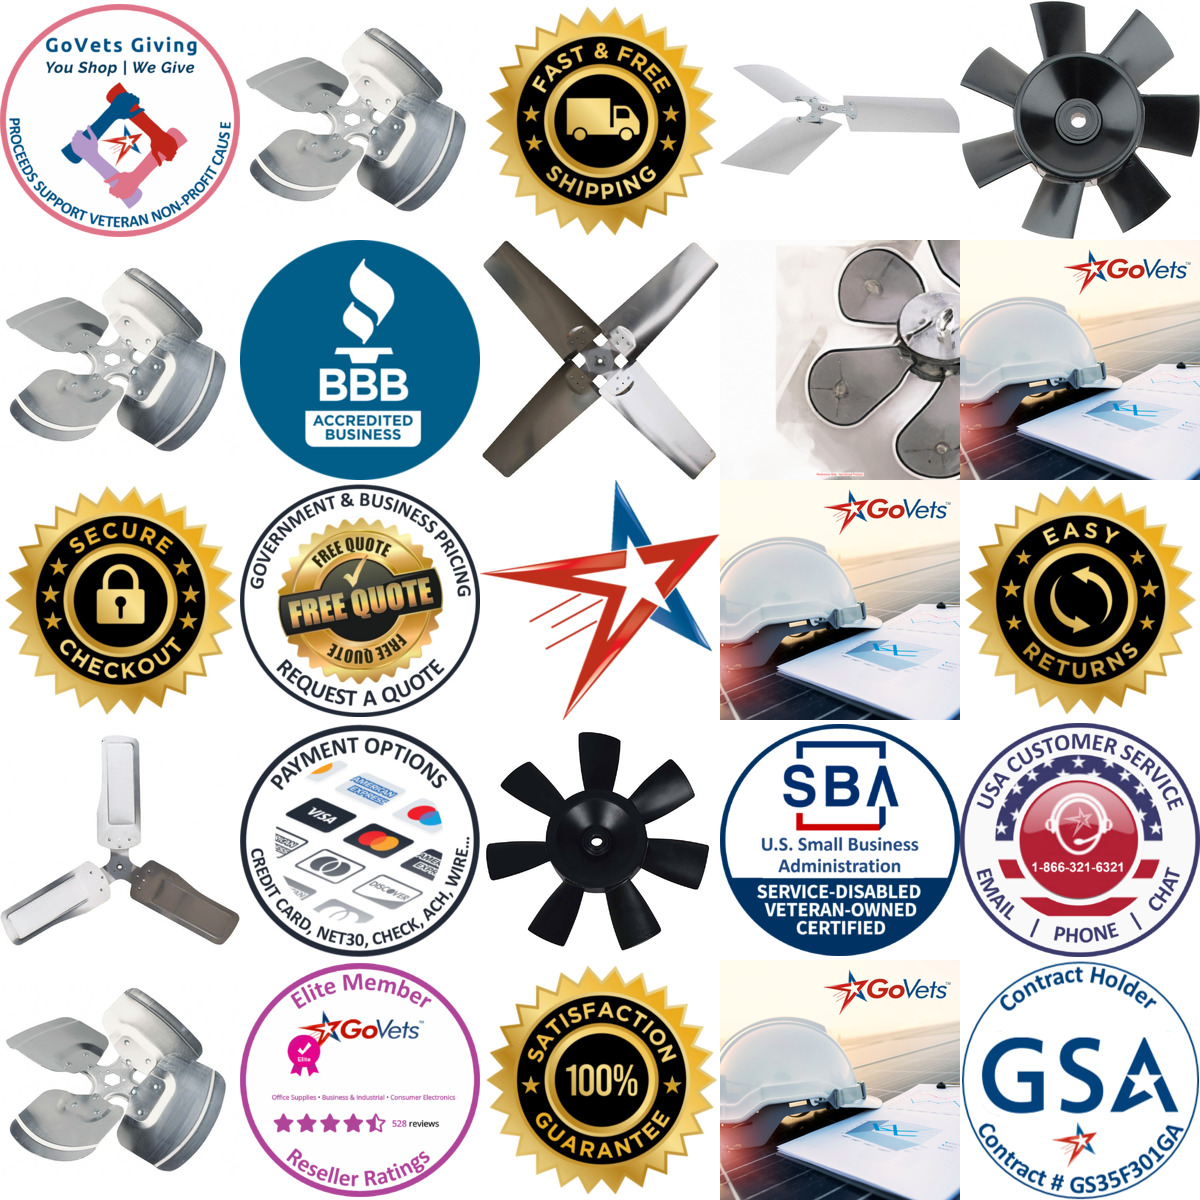 A selection of Replacement Fan Blades products on GoVets